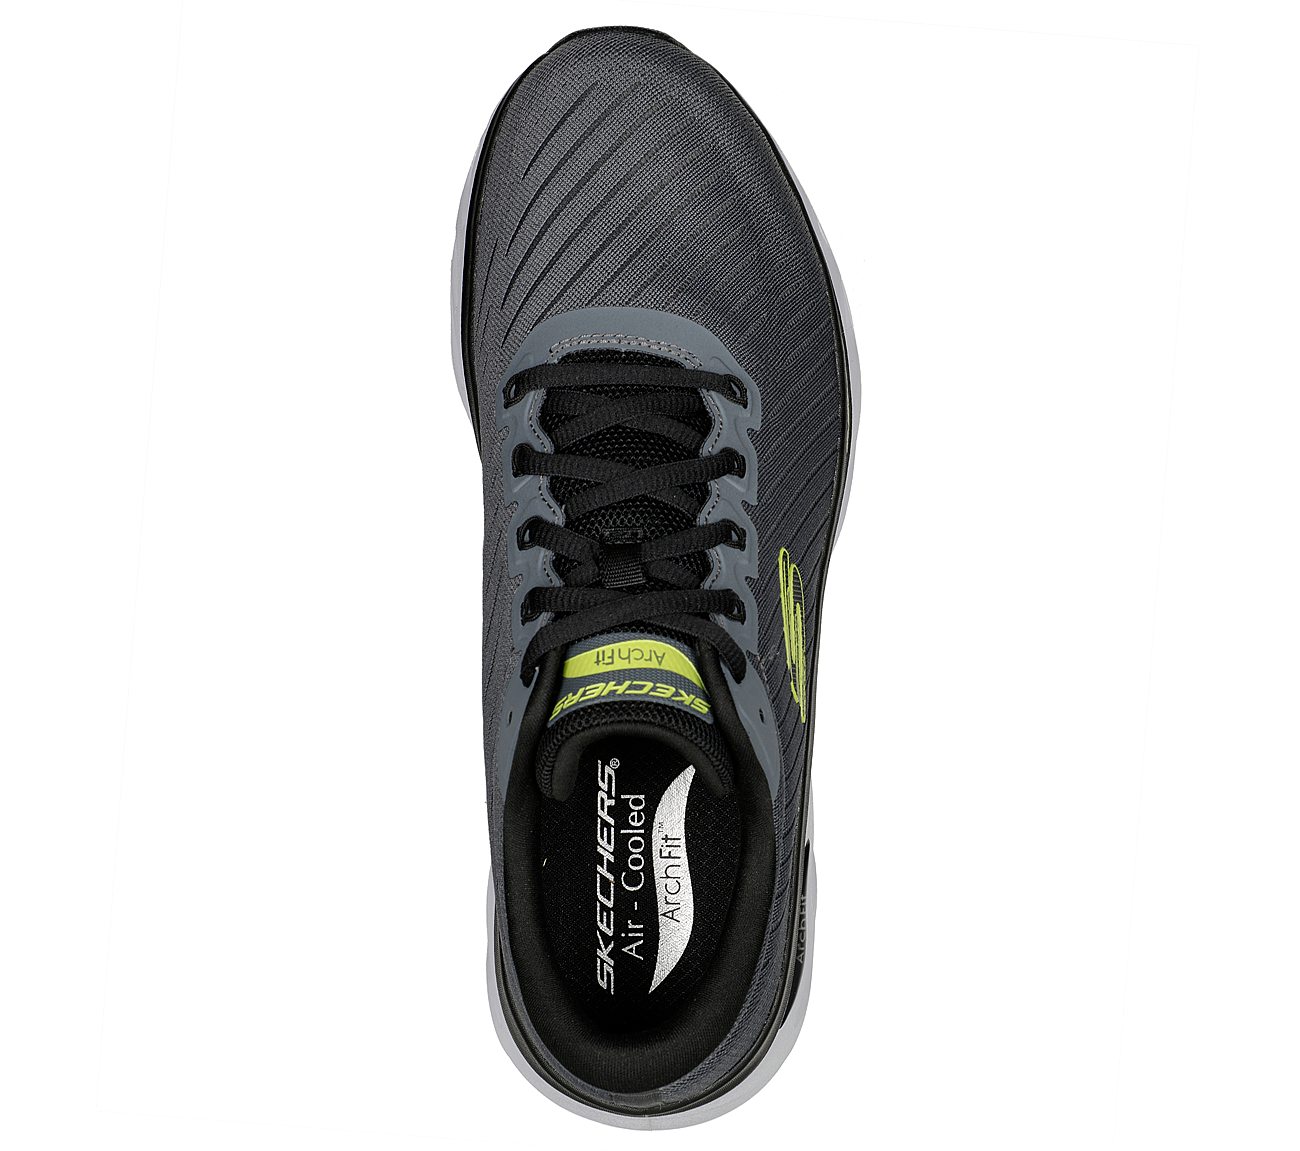 ARCH FIT GLIDE-STEP - KRONOS, CHARCOAL/BLACK Footwear Top View